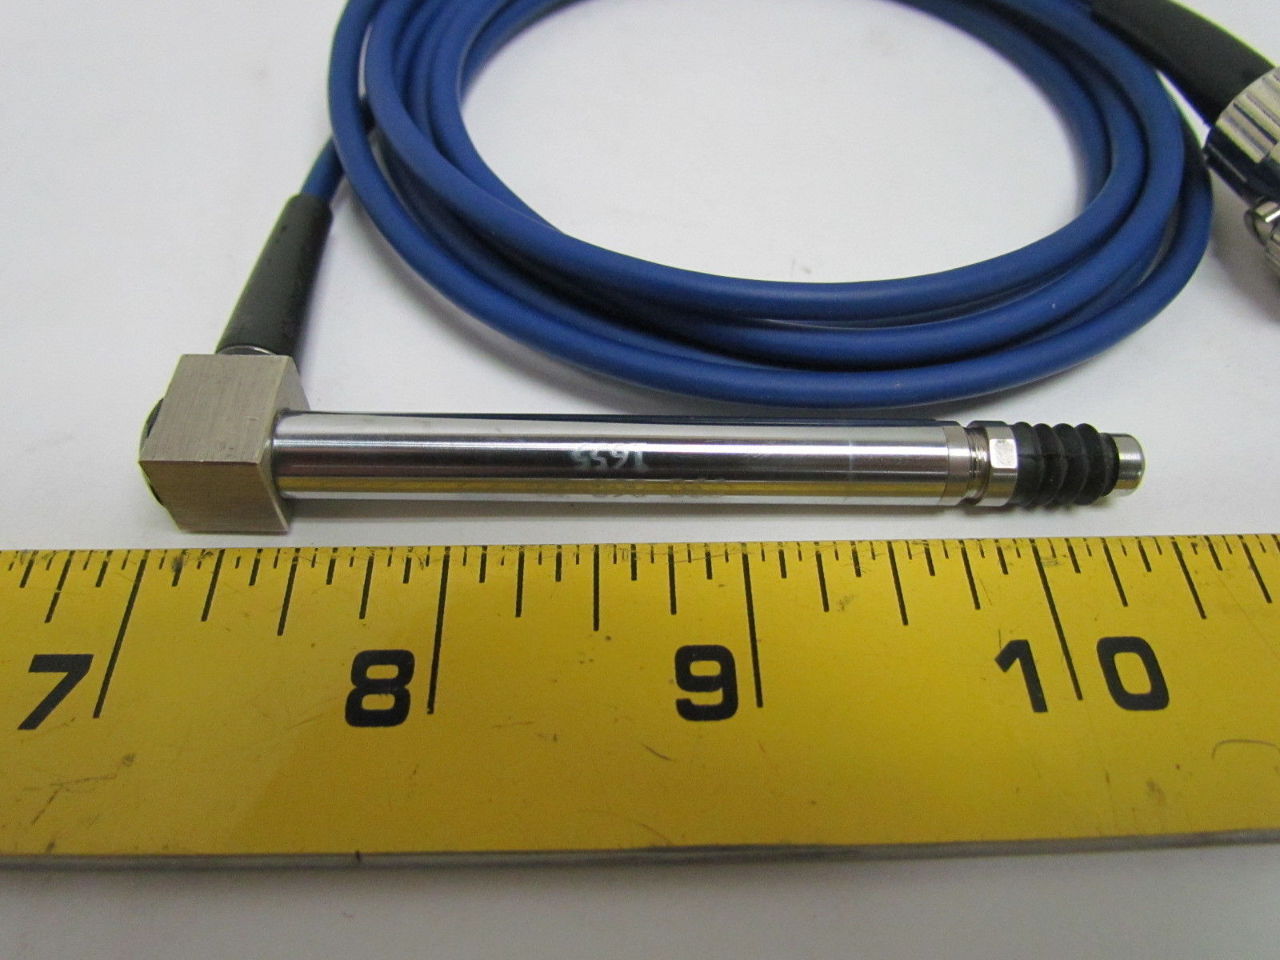 Micromatic 990-860-39 Linear Transducer Digital Gauging Probe Gauge DIAGNOSTIC ULTRASOUND MACHINES FOR SALE